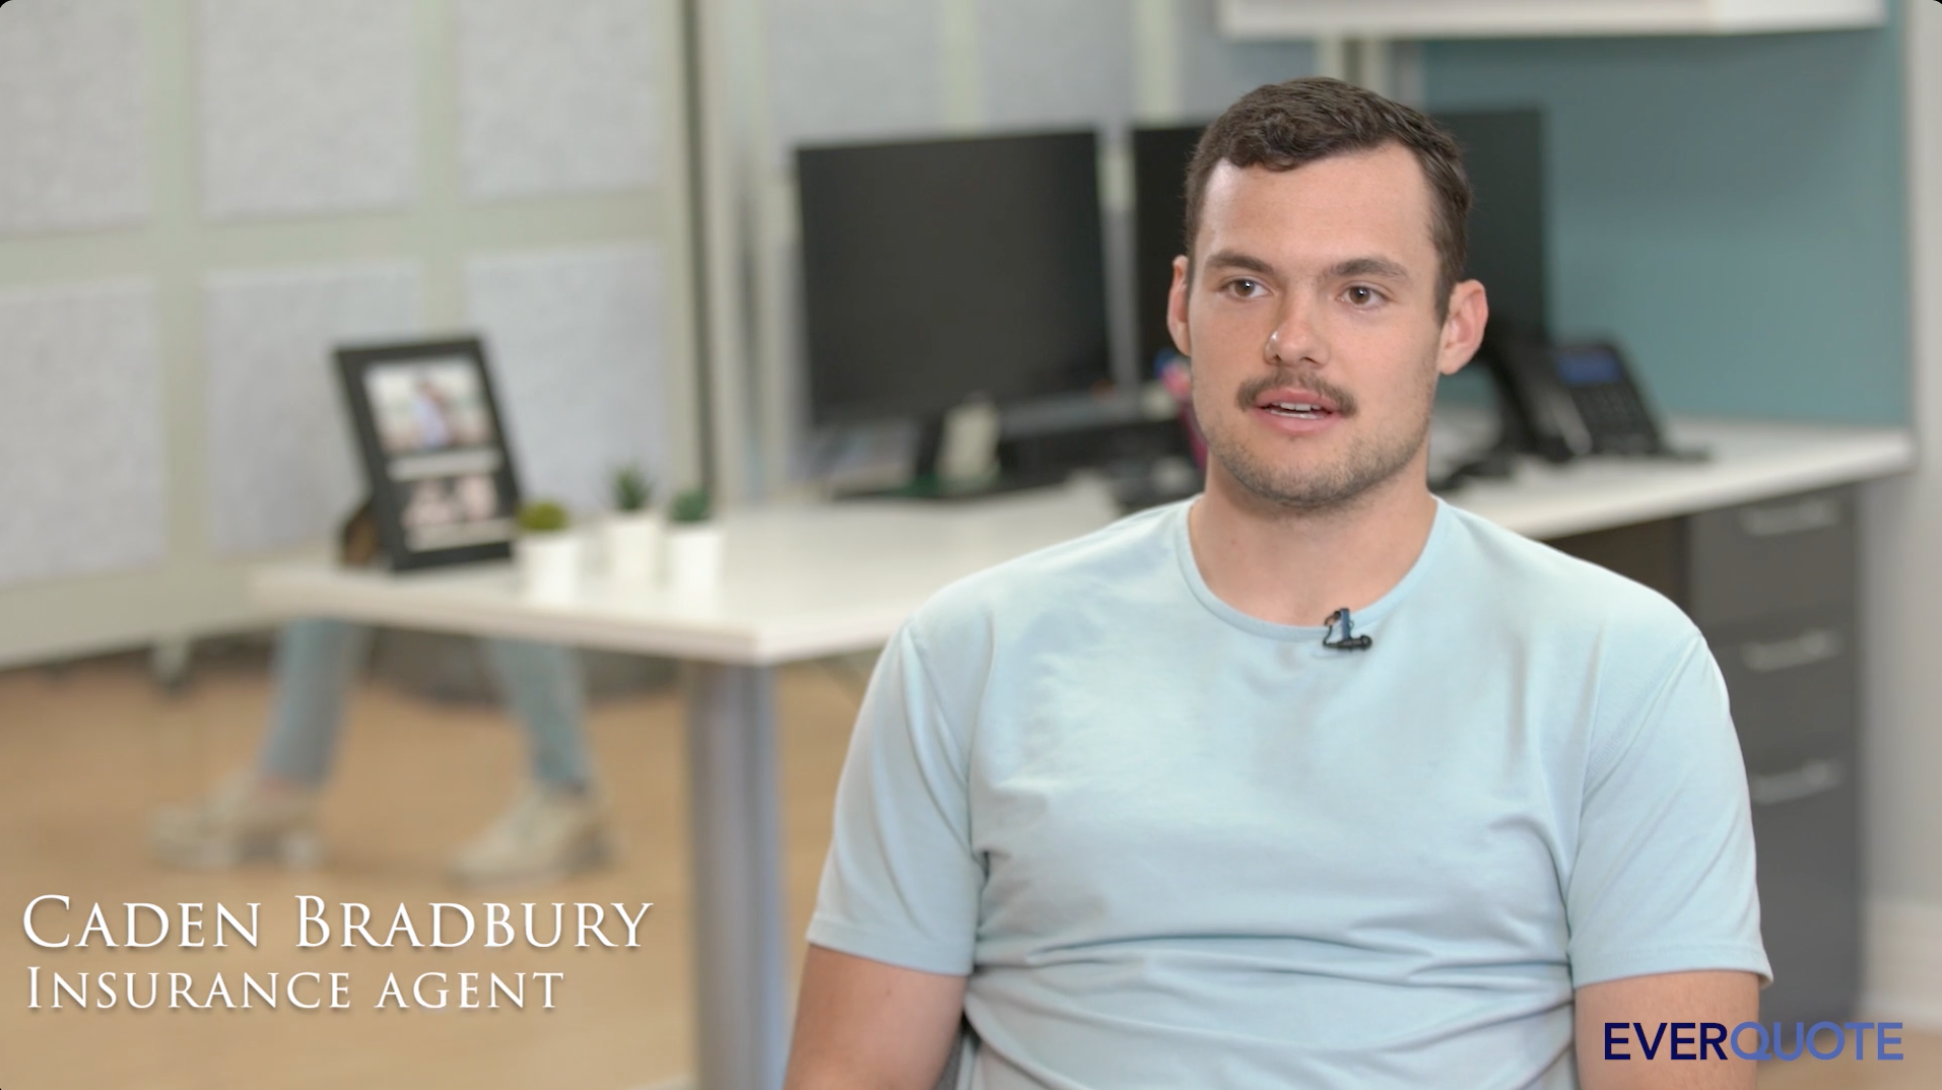 Agent Caden Bradbury Shares How He Increased His Bind Rate By 50% With EverQuote' Lead Connection Service (LCS)